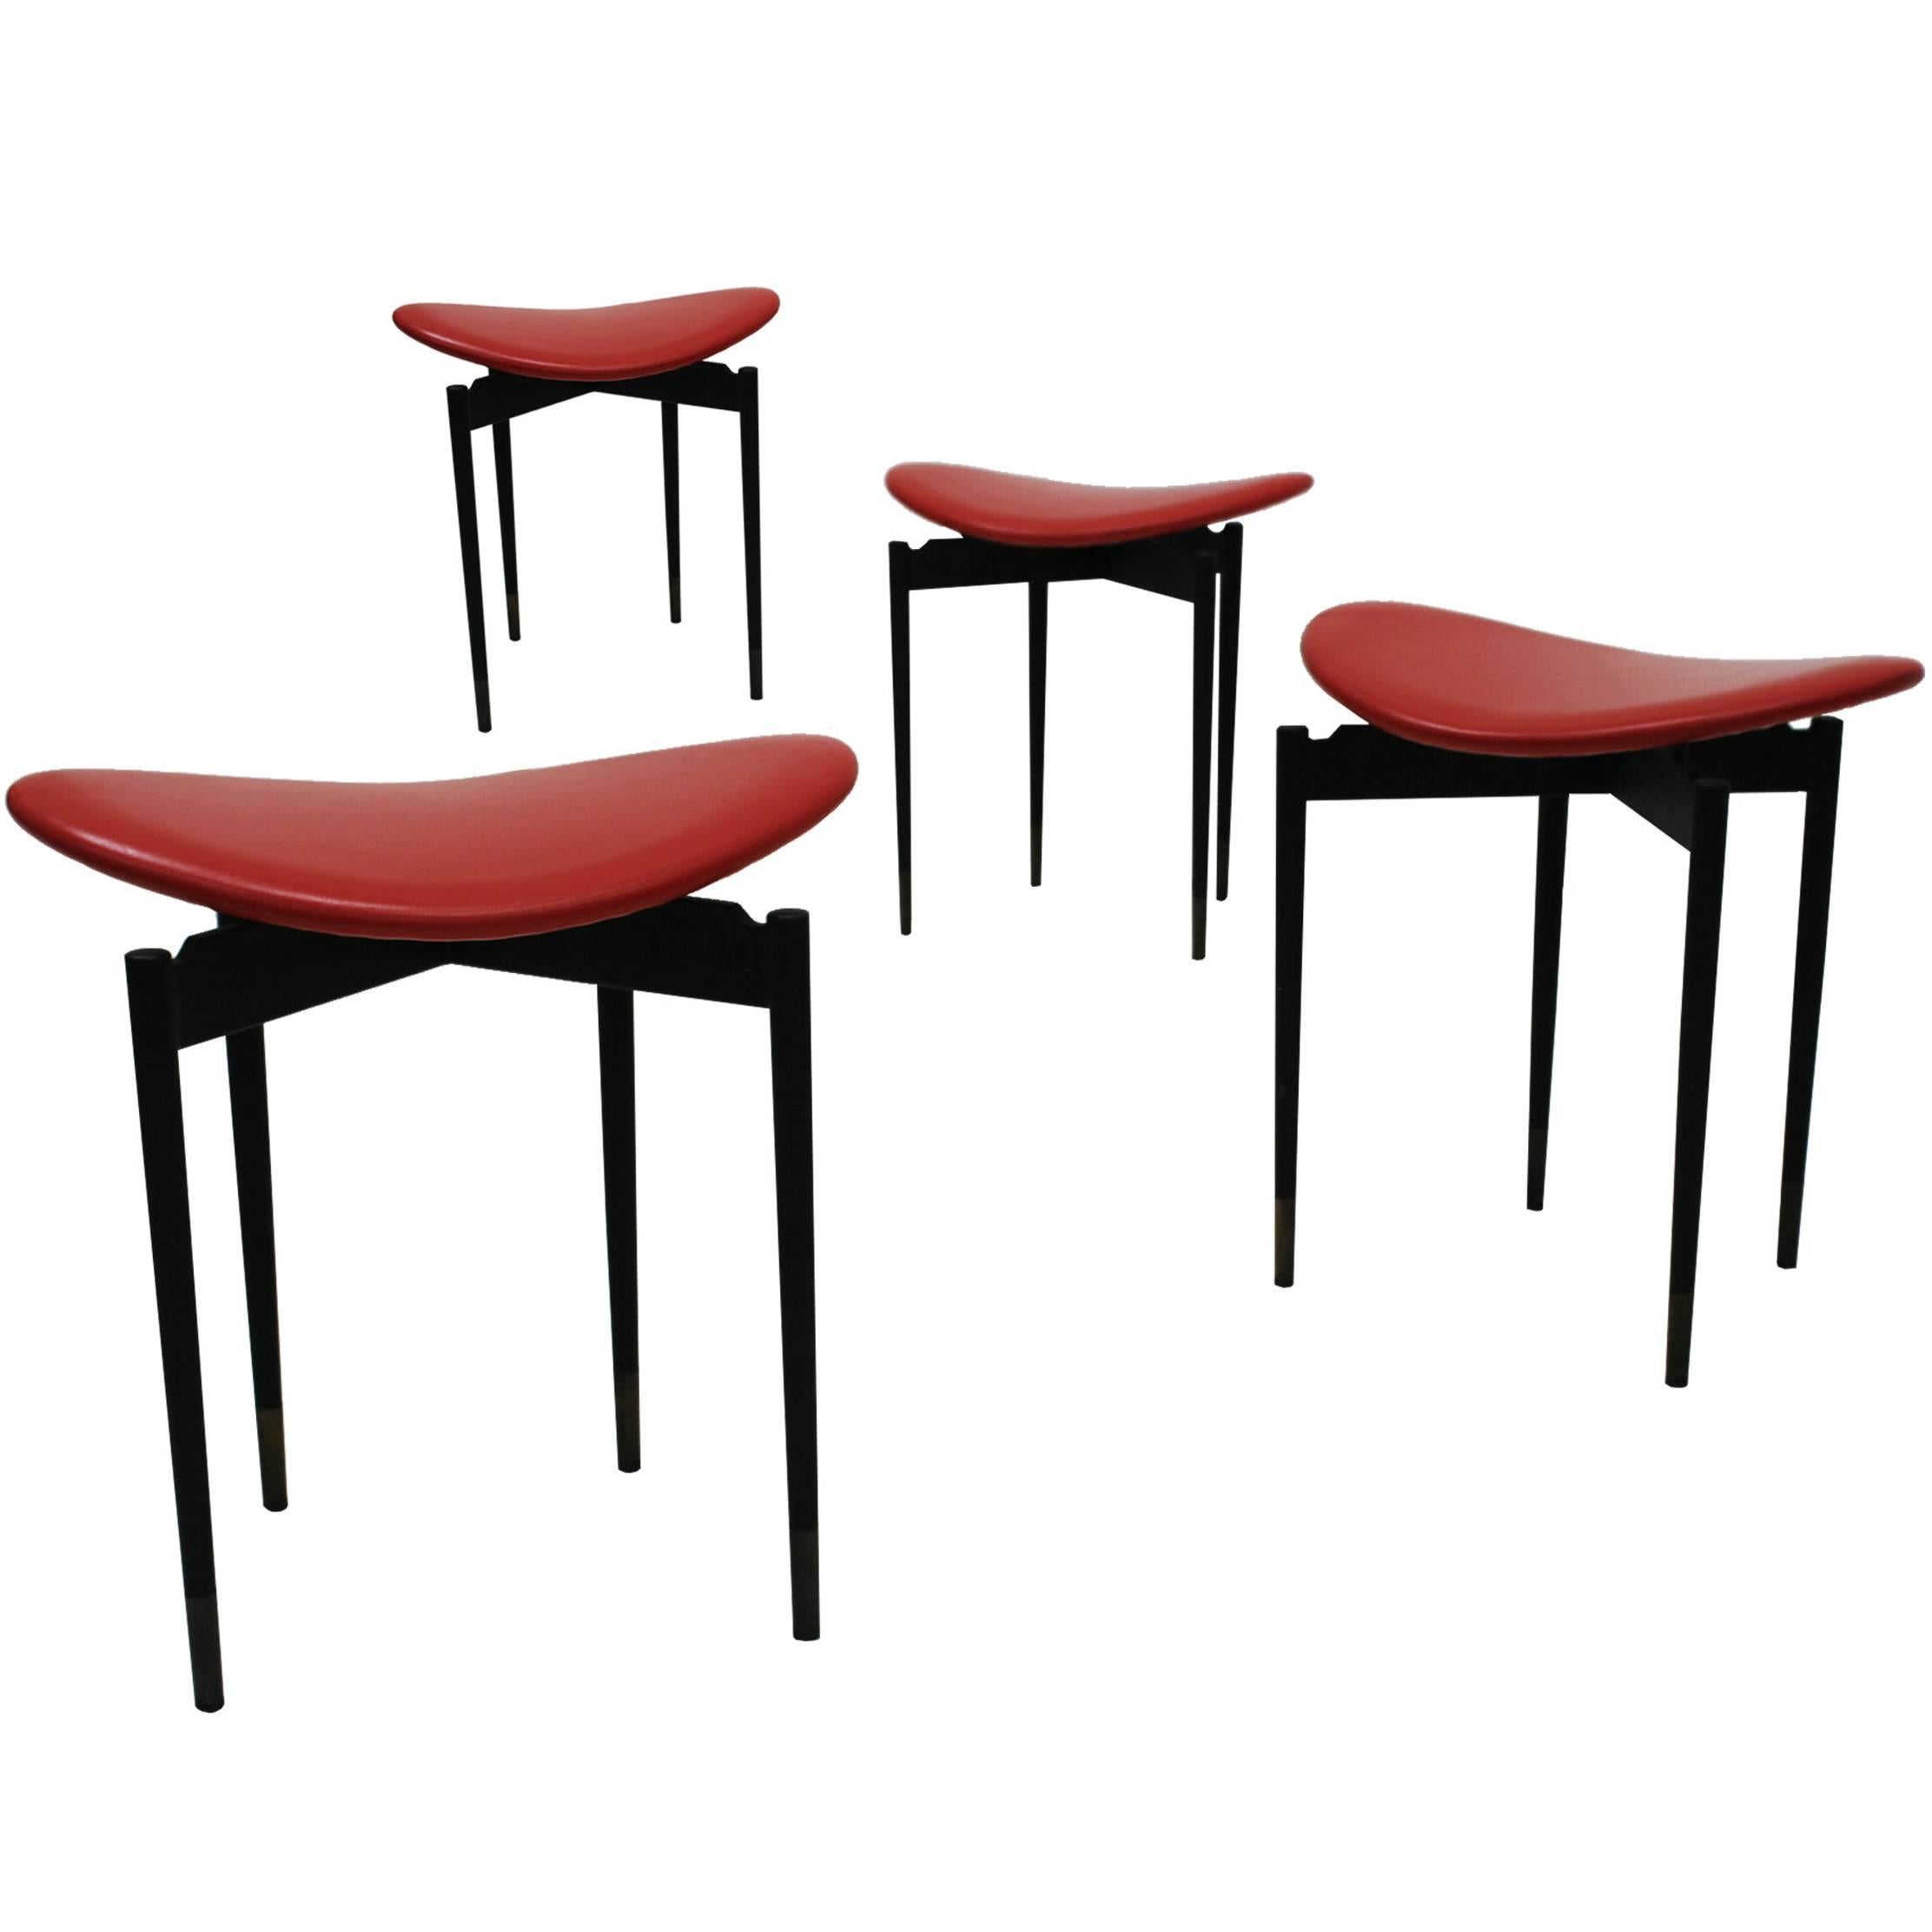 Set of Four "Lutrario" Stools Designed by Carlo Mollino, Italy, 1959